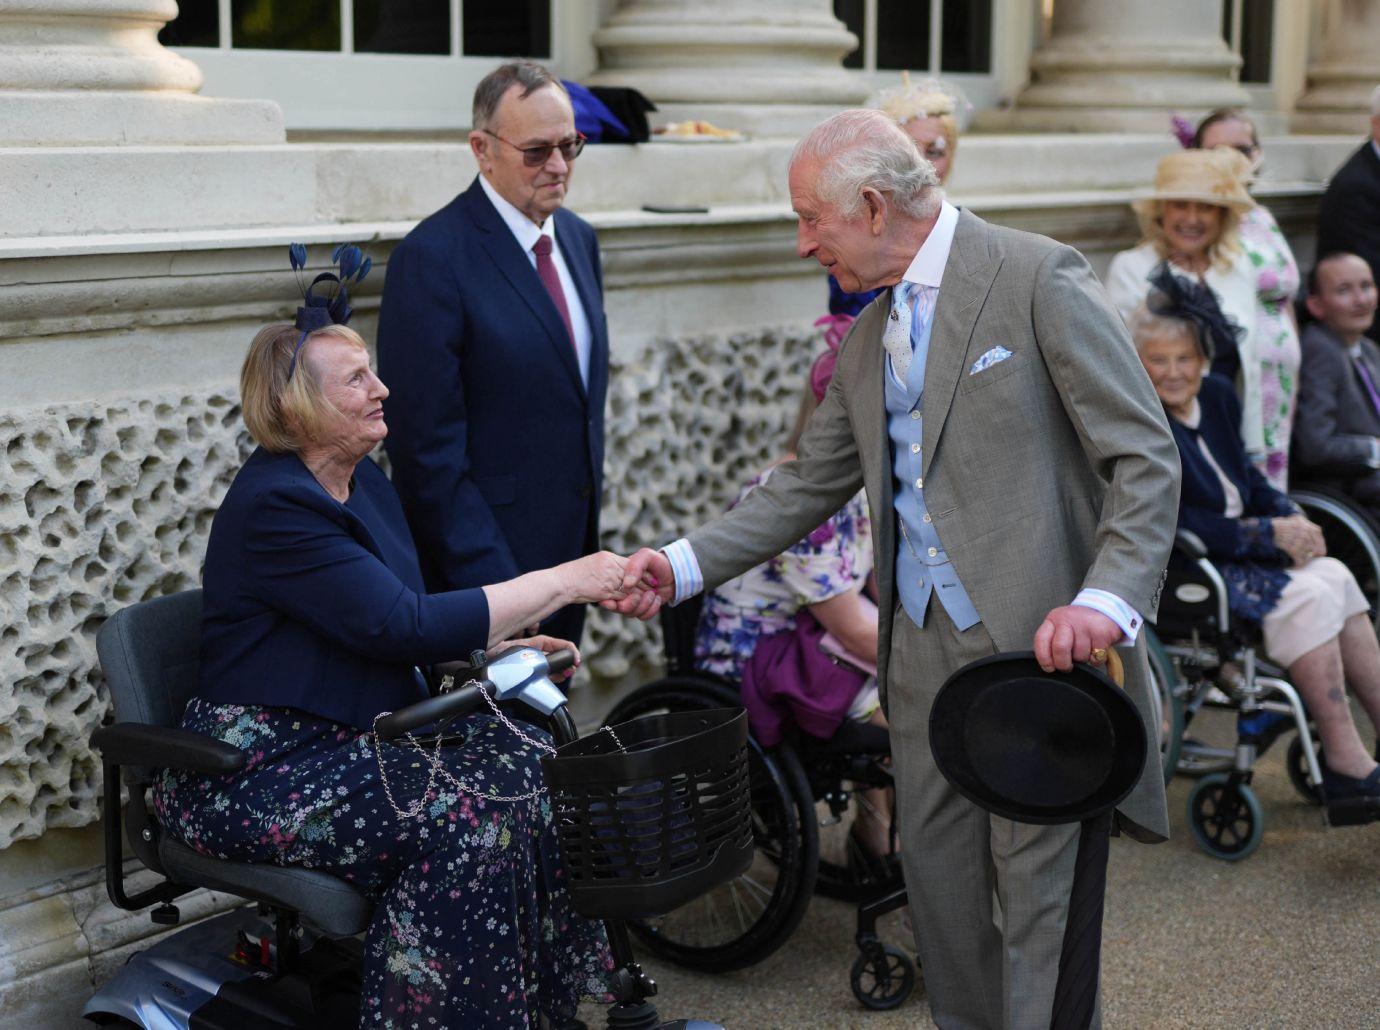 king charles ensured no royal attend prince harry service scheduling party